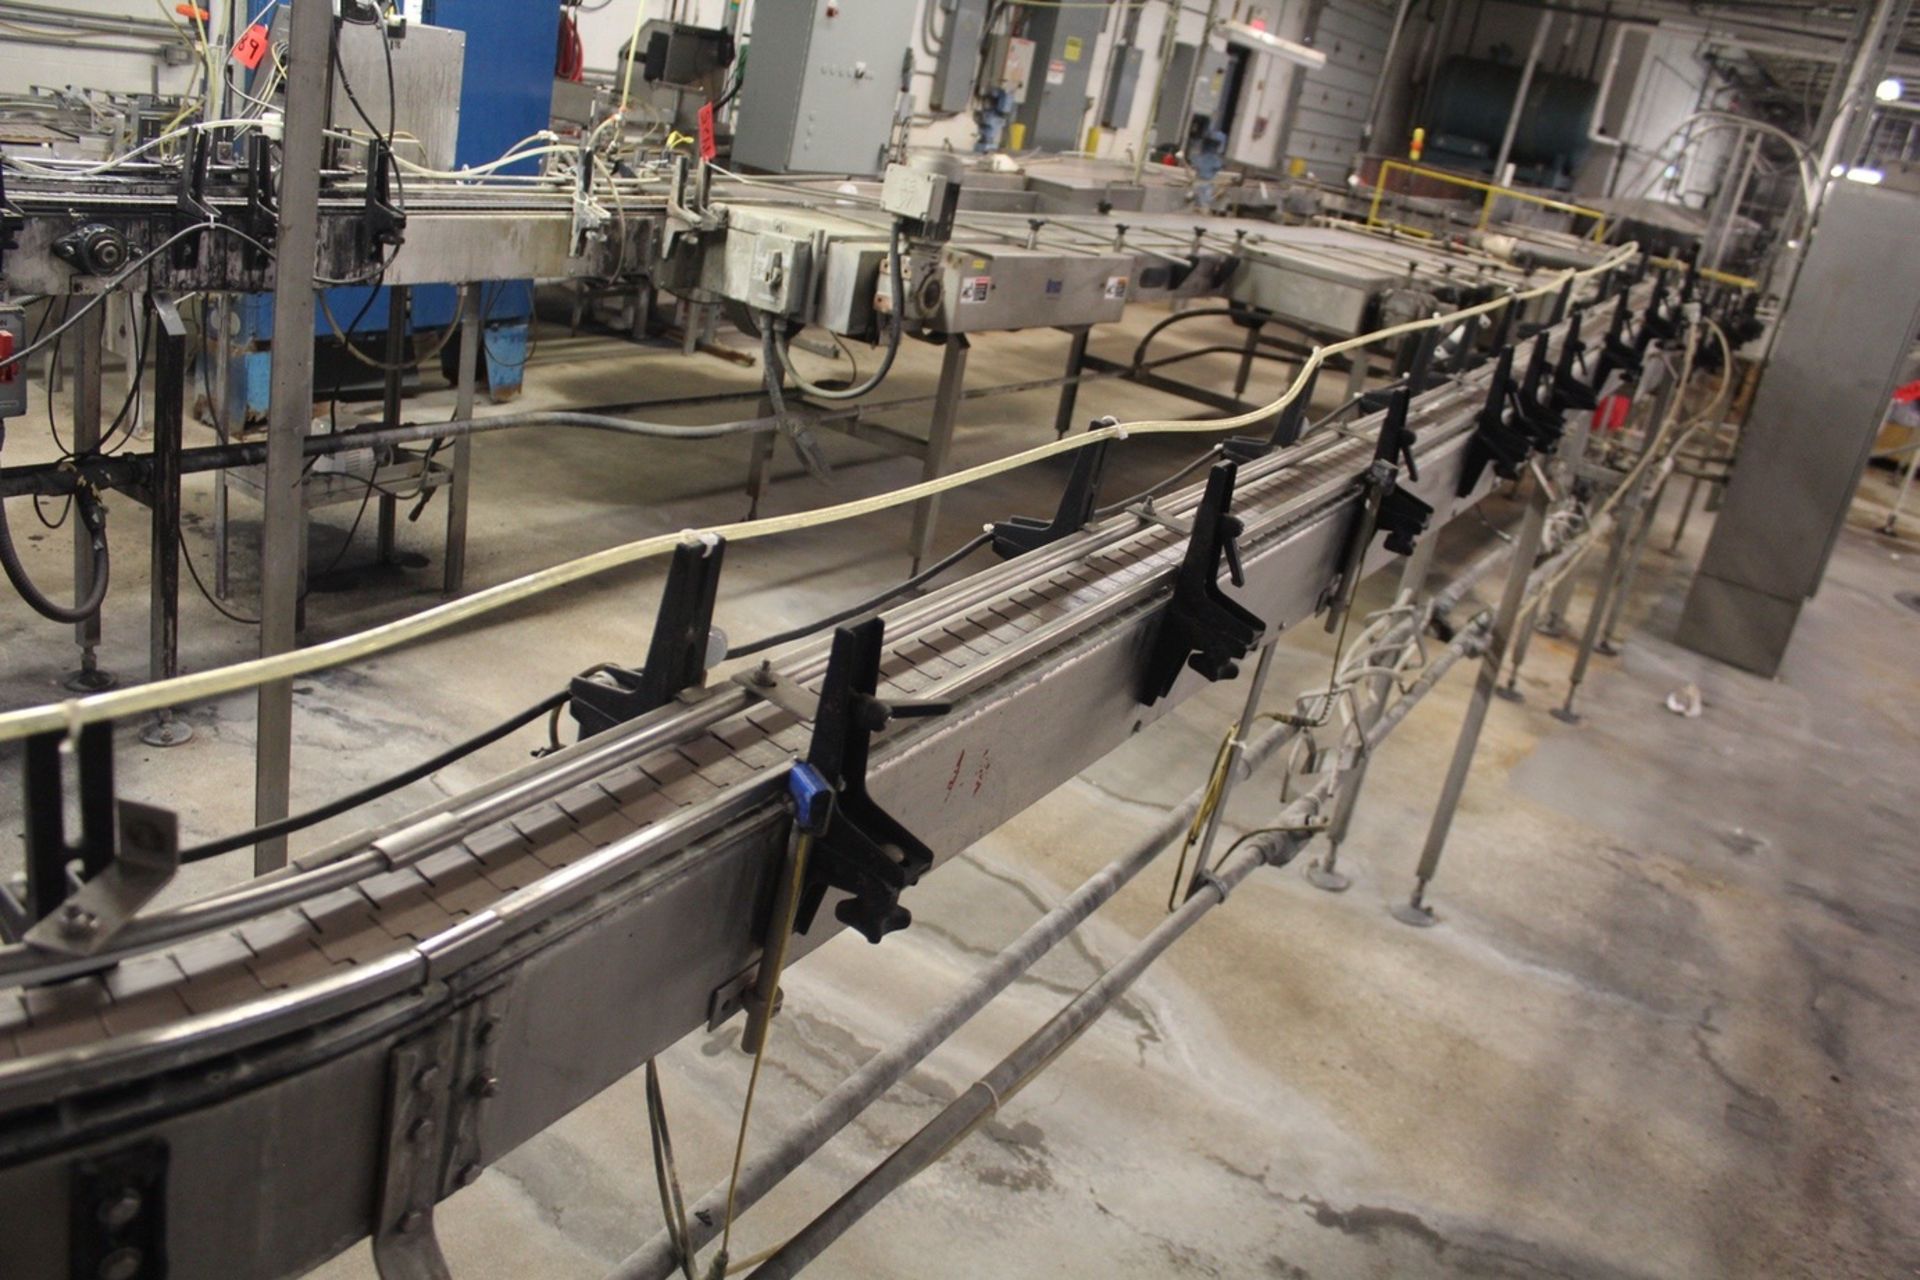 Bevco Flat Top Conveyor Sections | Subject to Bulk 149B | Rigging: $725 - Image 3 of 4